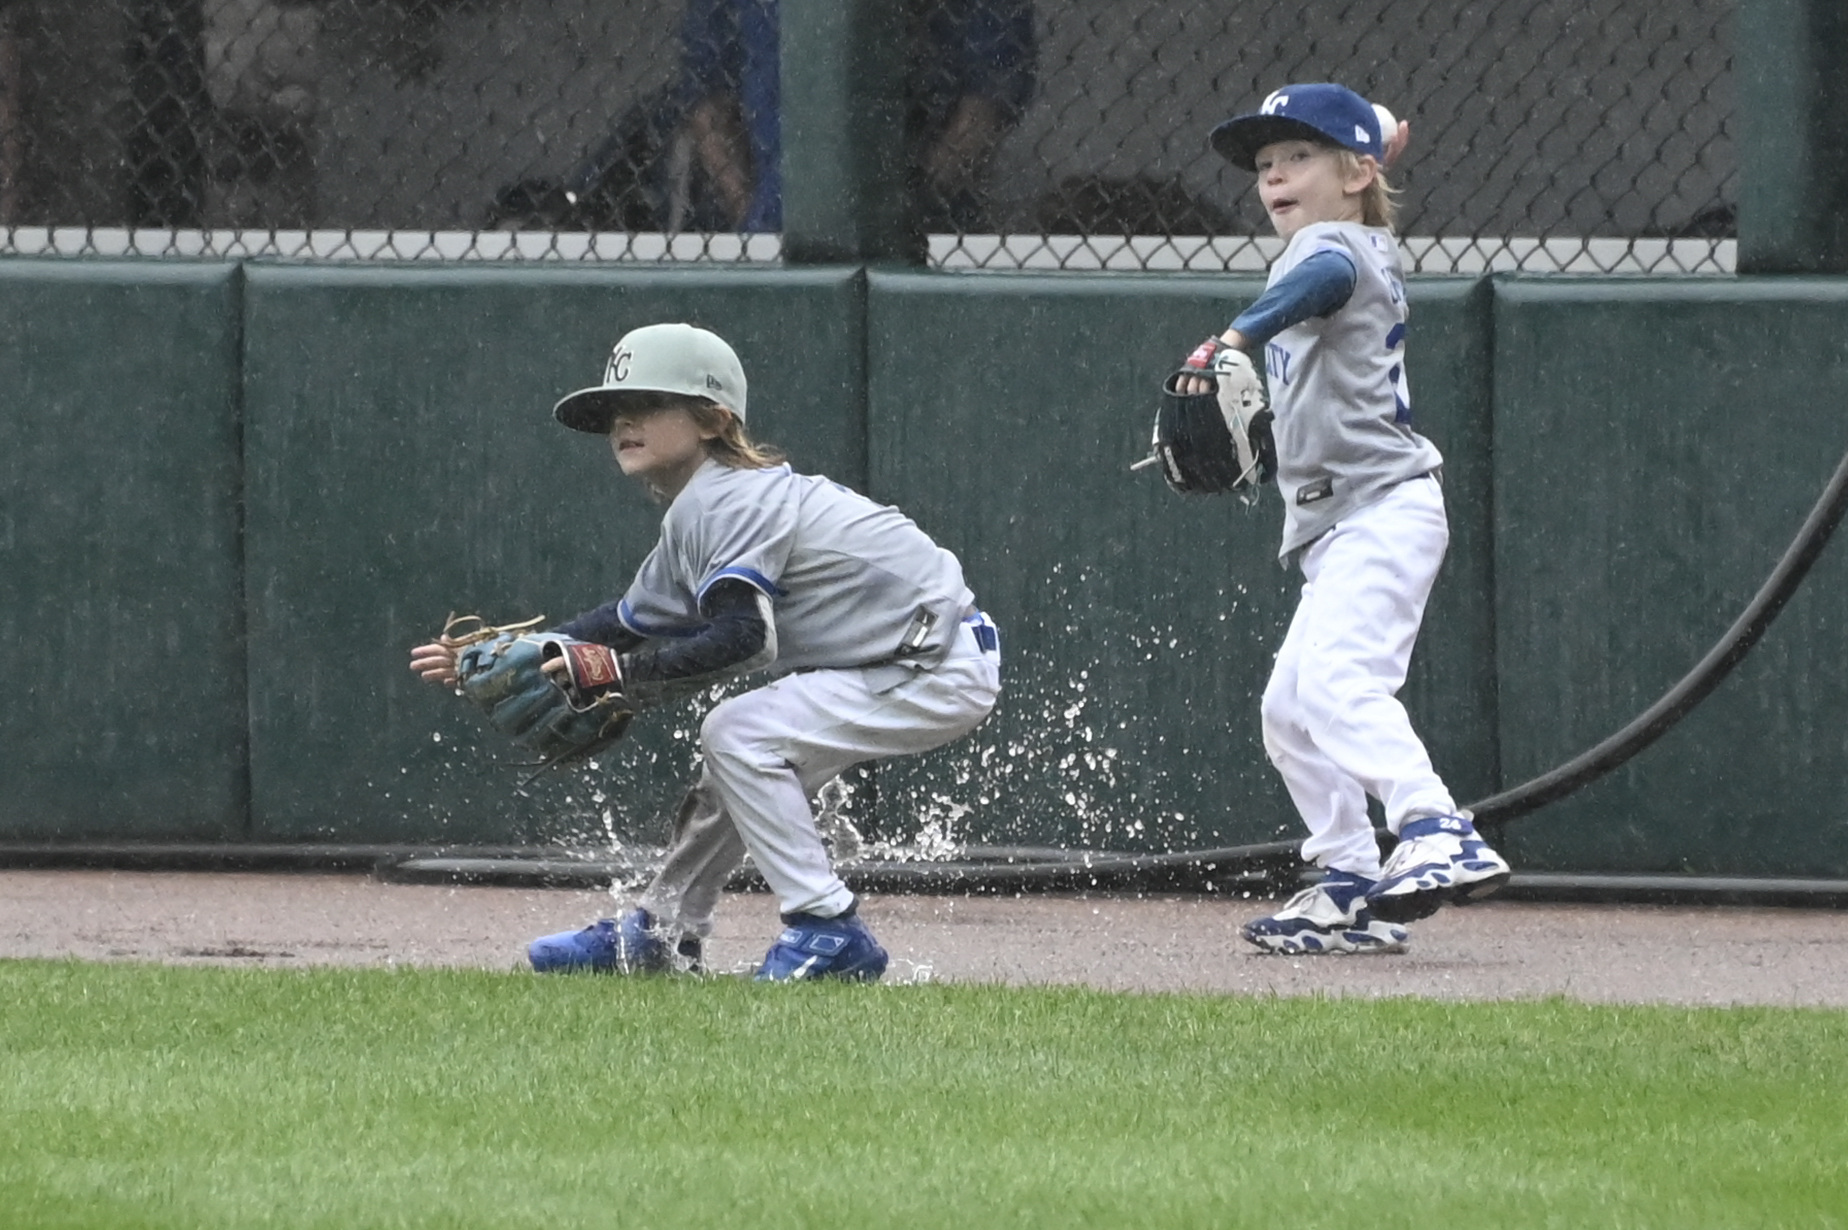 Royals-White Sox game rained out. Straight doubleheader set for Tuesday